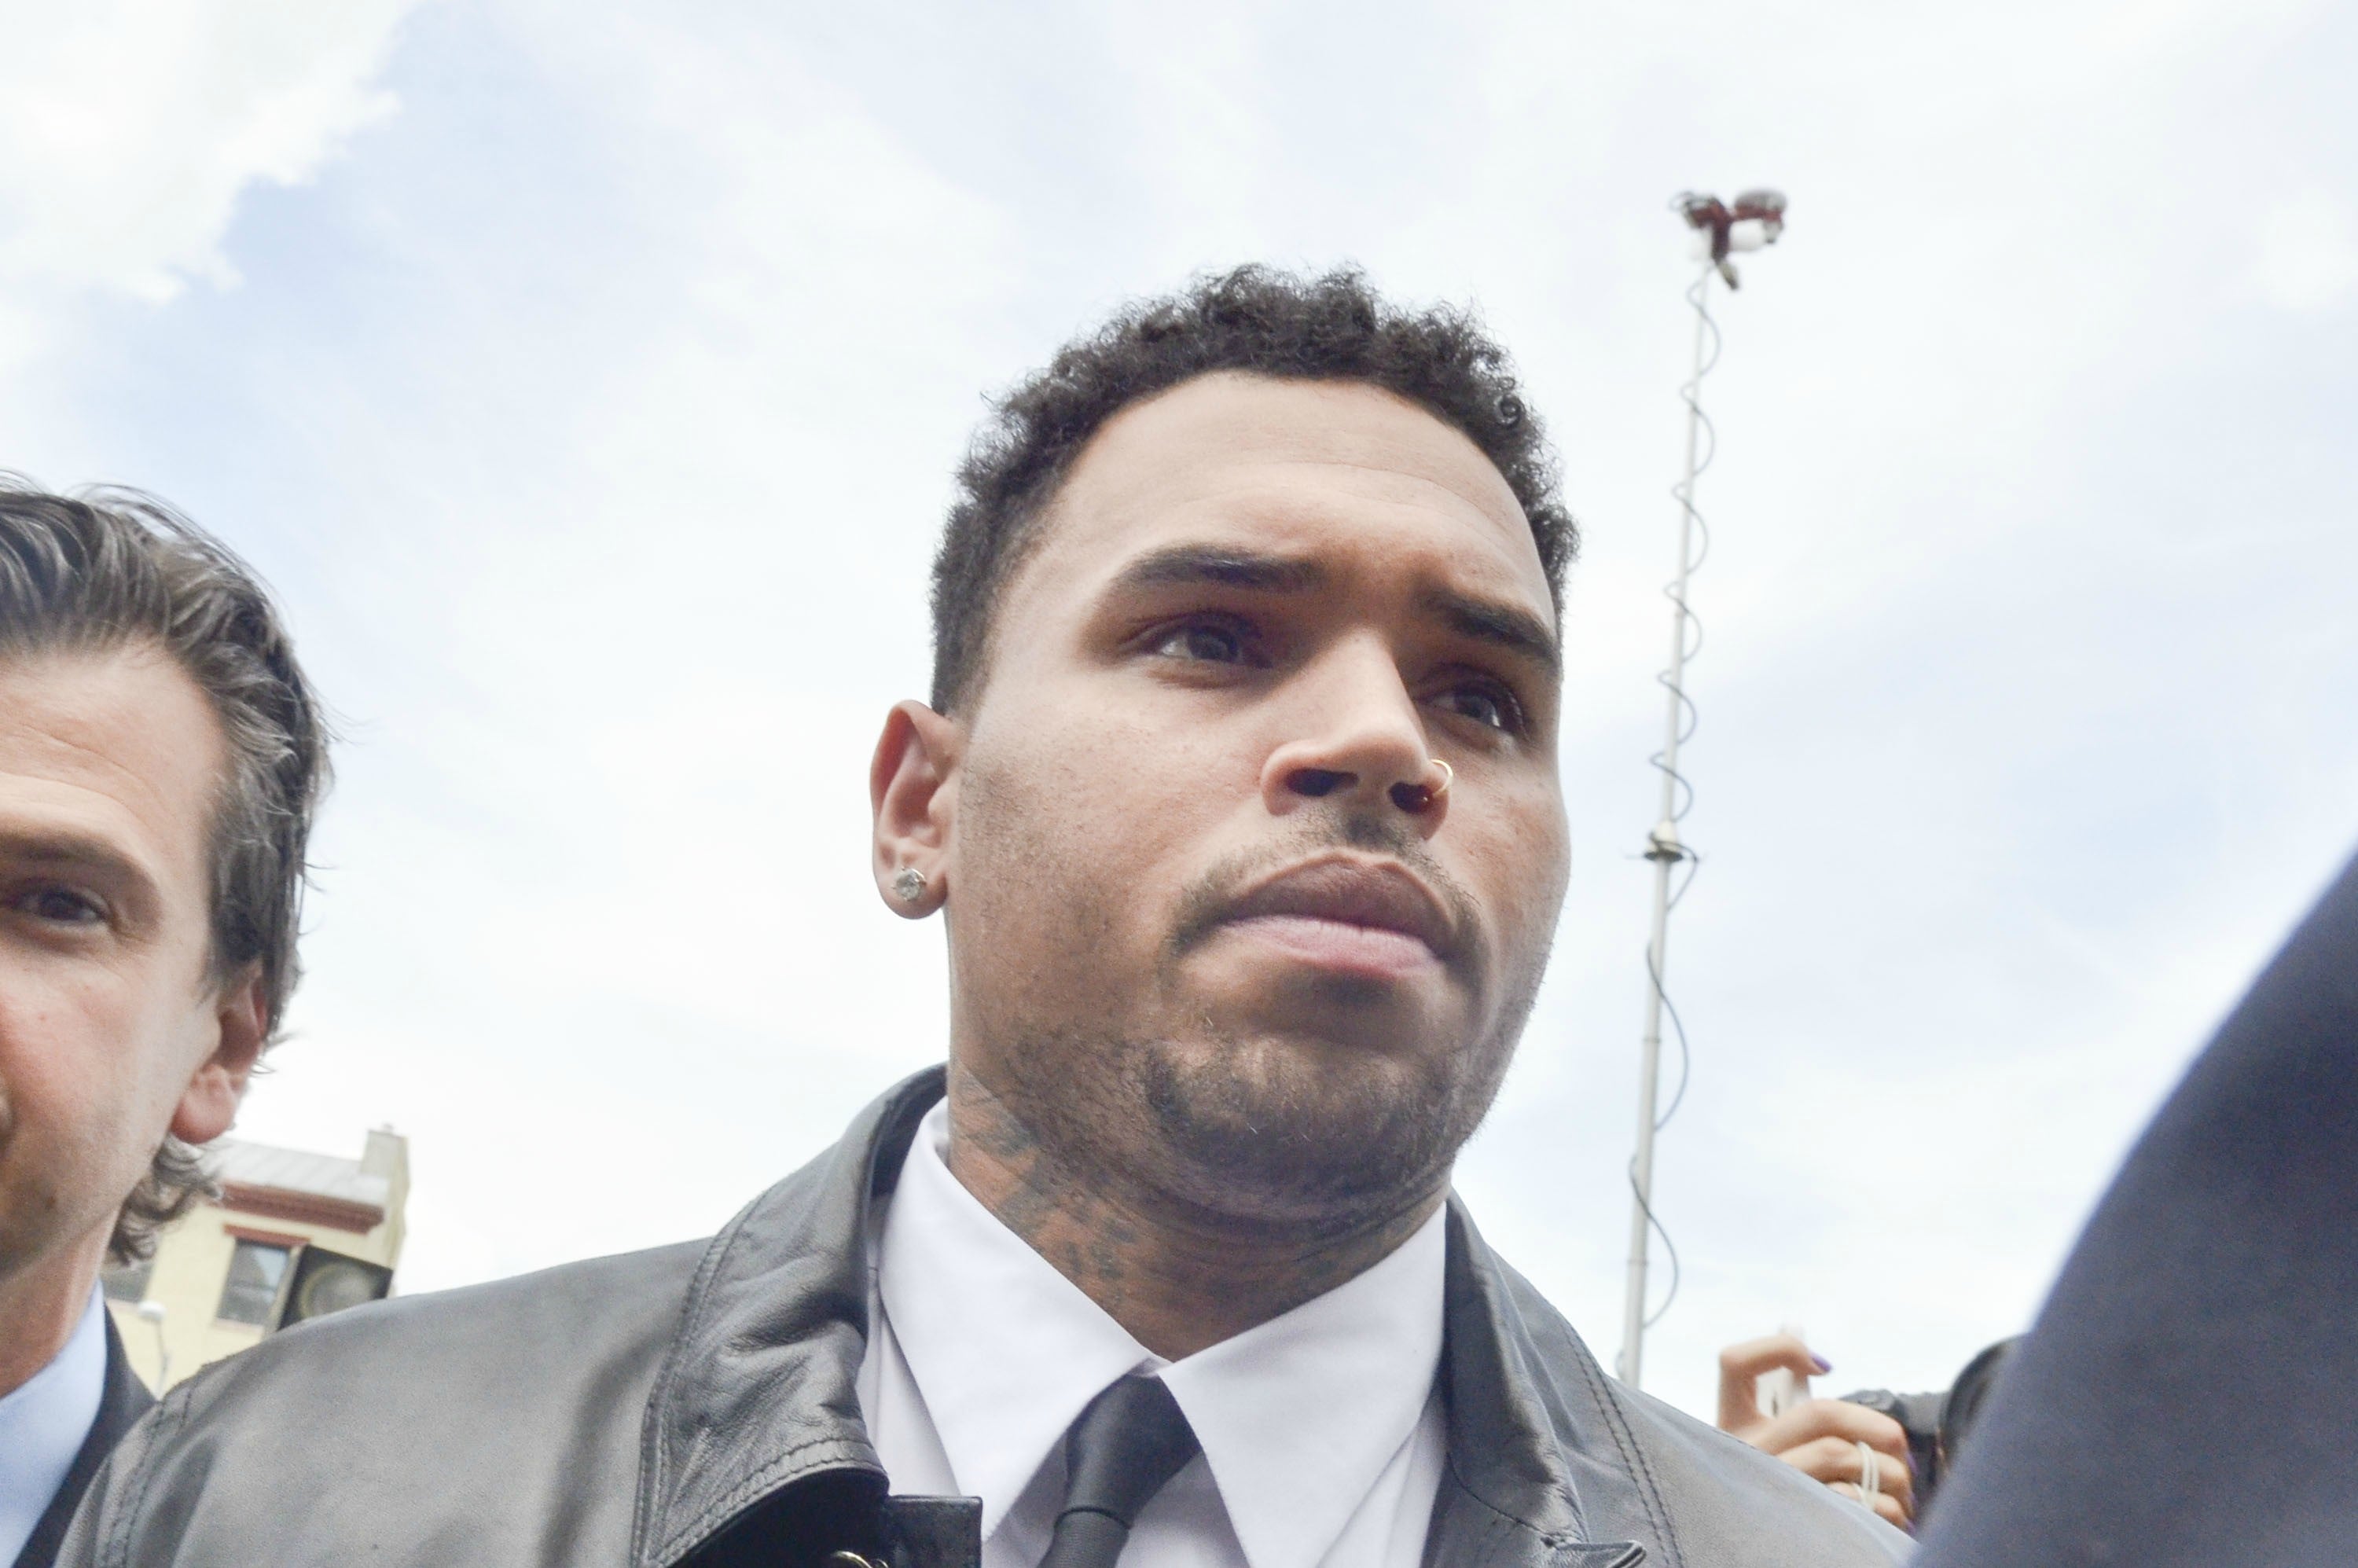 Petition Seeks To Have RCA Drop Chris Brown After Photo Emerges